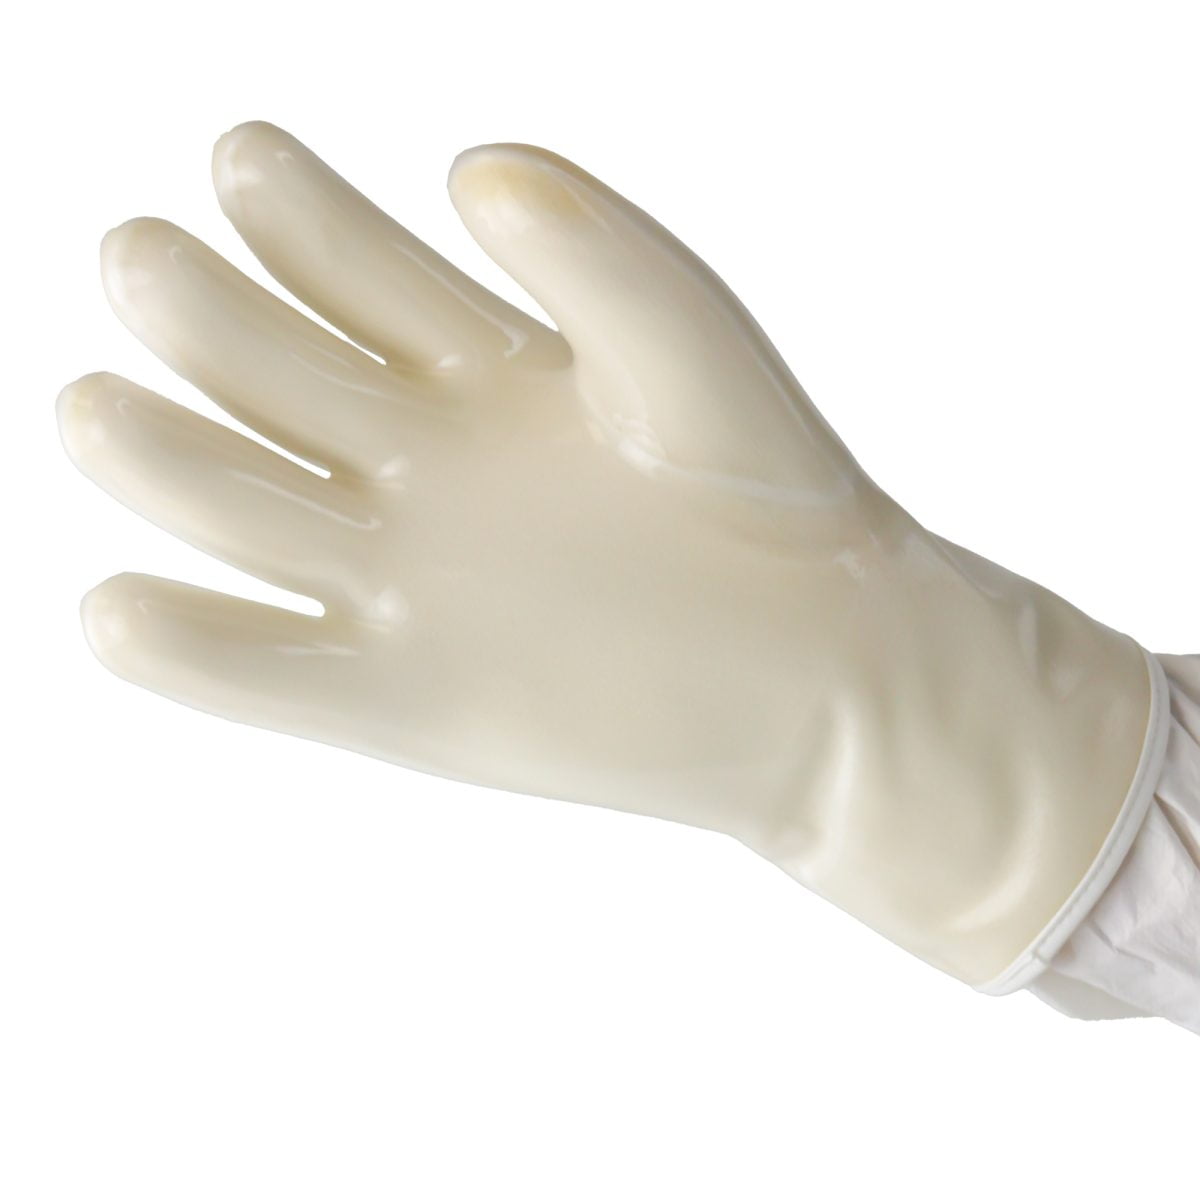 Silicone Heat Resistance Gloves 270mm - Integrity